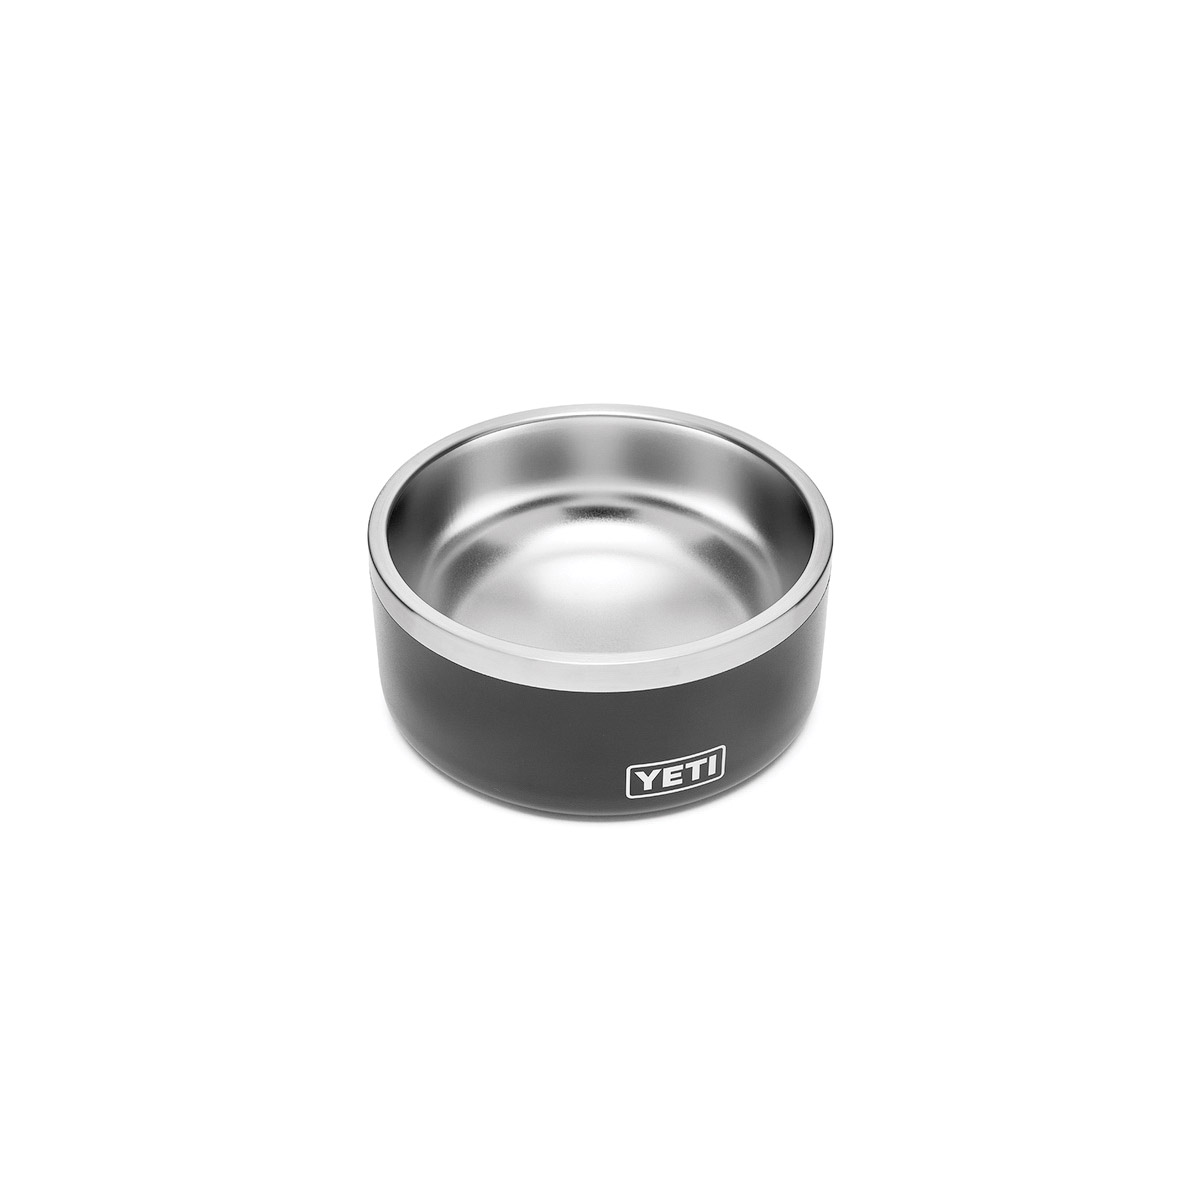 YETI Boomer 21071500012 Dog Bowl, 6-4/5 in Dia, 4 Cup Volume, Stainless Steel, Brick Red - 3